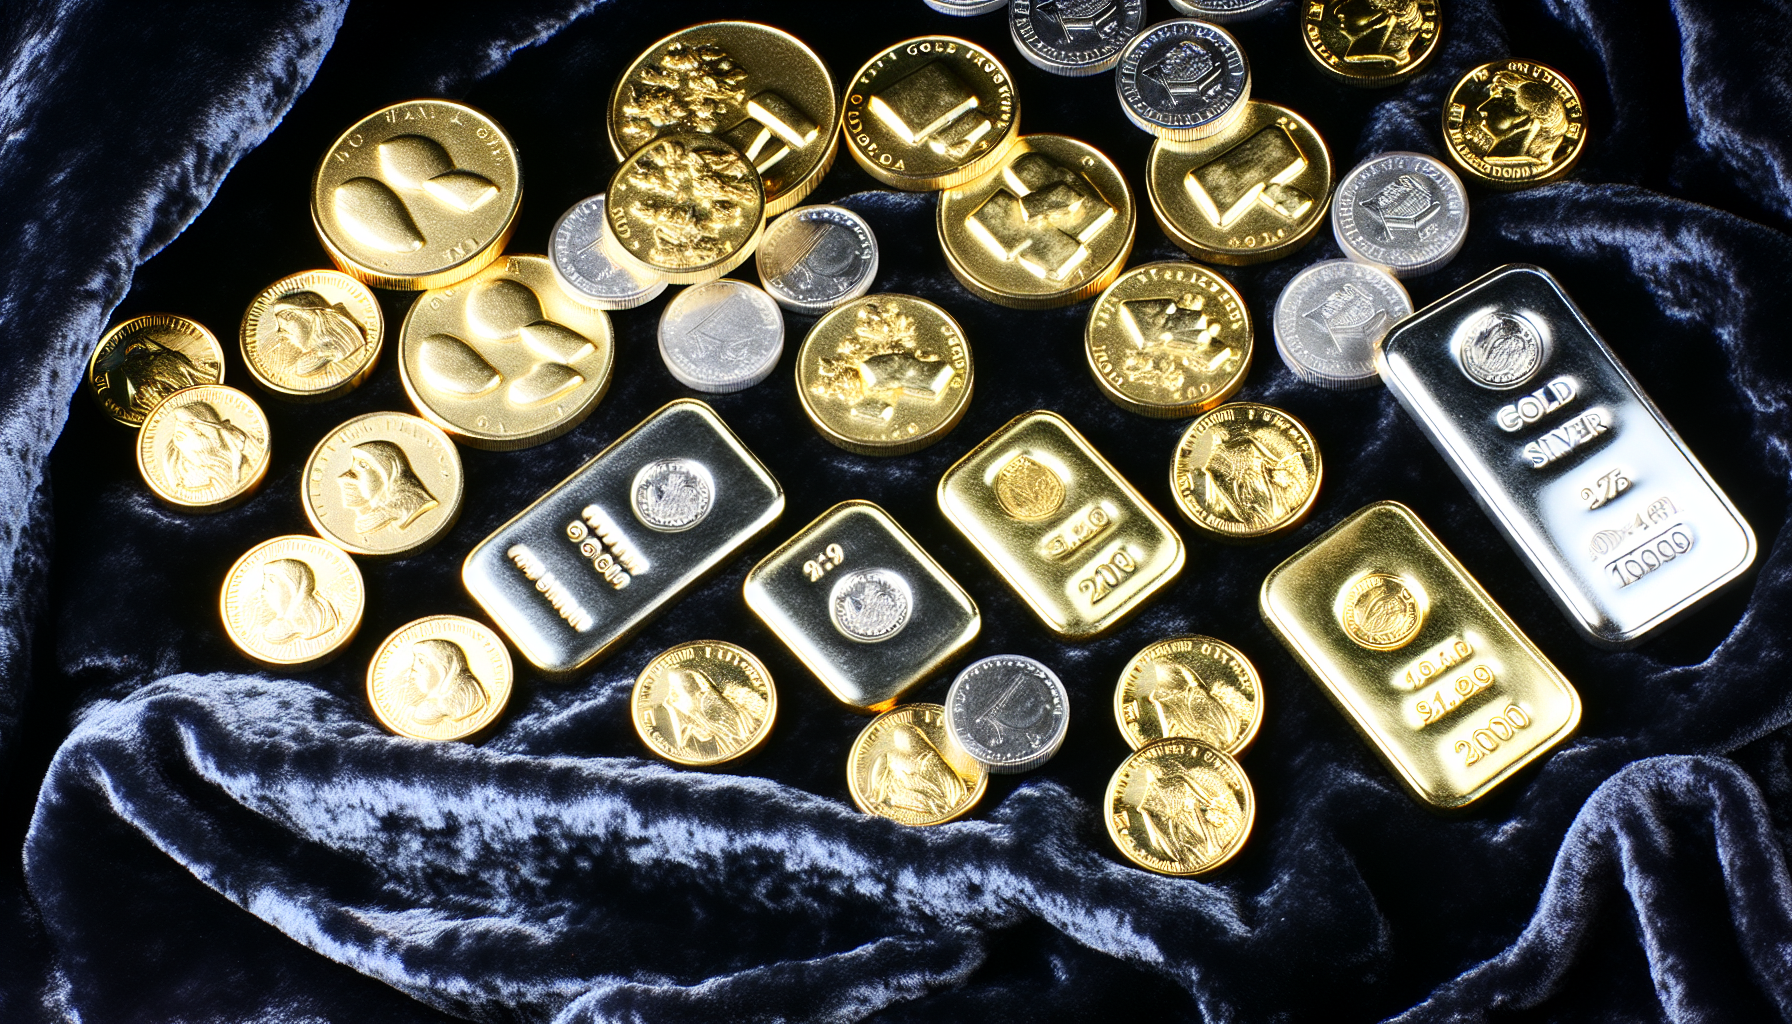 Assorted gold and silver coins and bars